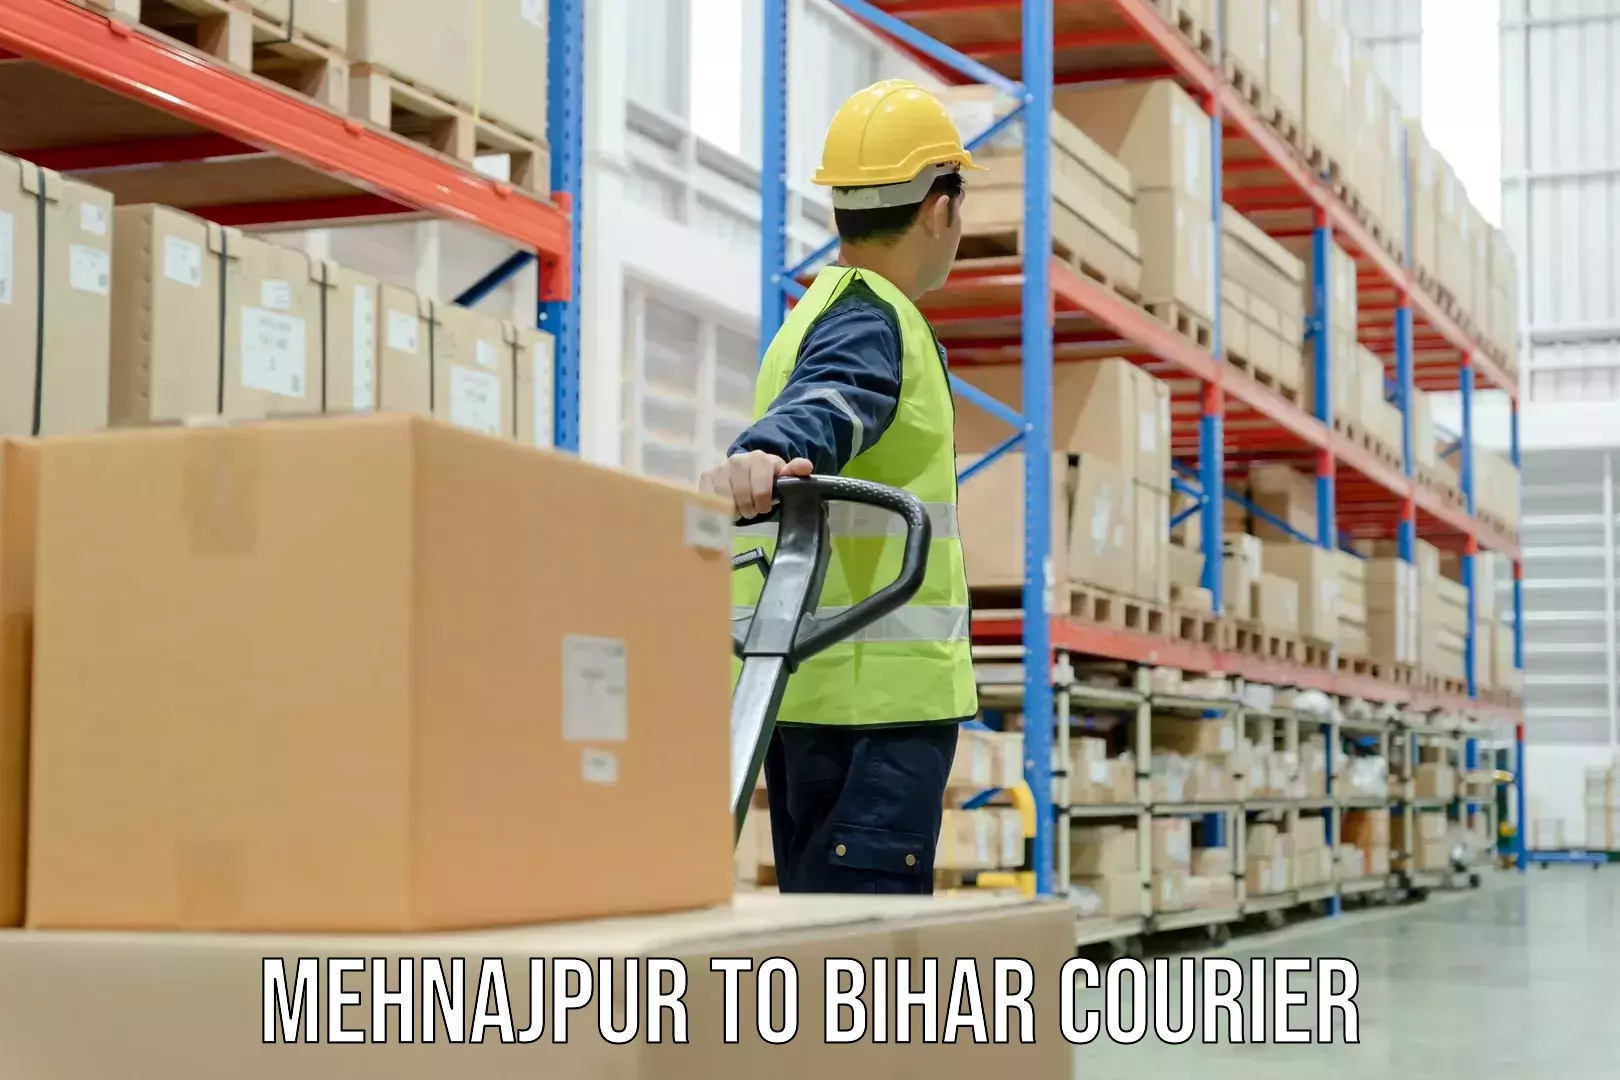 State-of-the-art courier technology Mehnajpur to Arrah